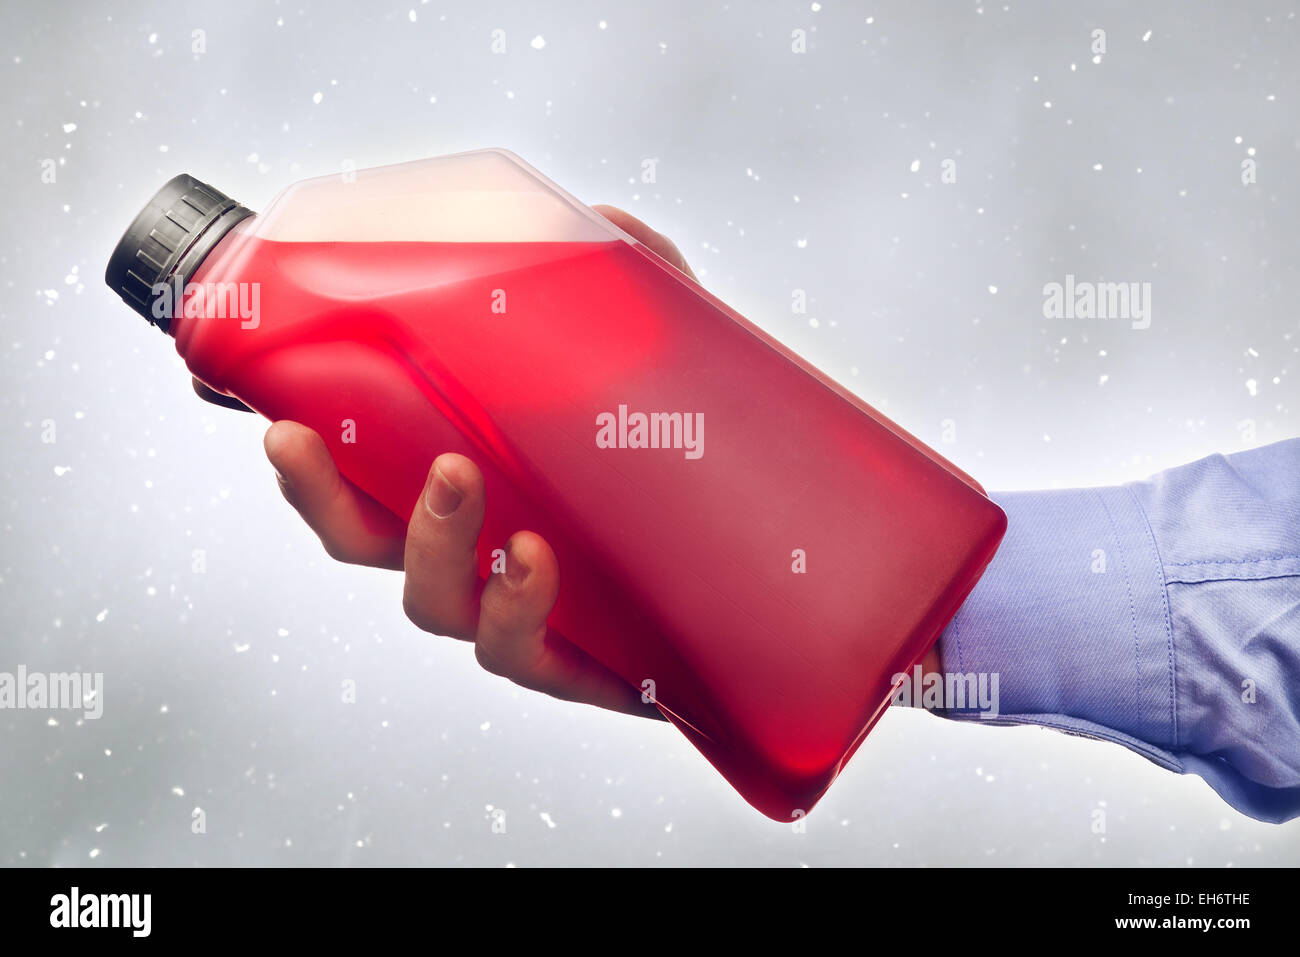 Male hand holding a bottle of antifreeze additive water-based liquid for winter condition driving. Toned image. Stock Photo